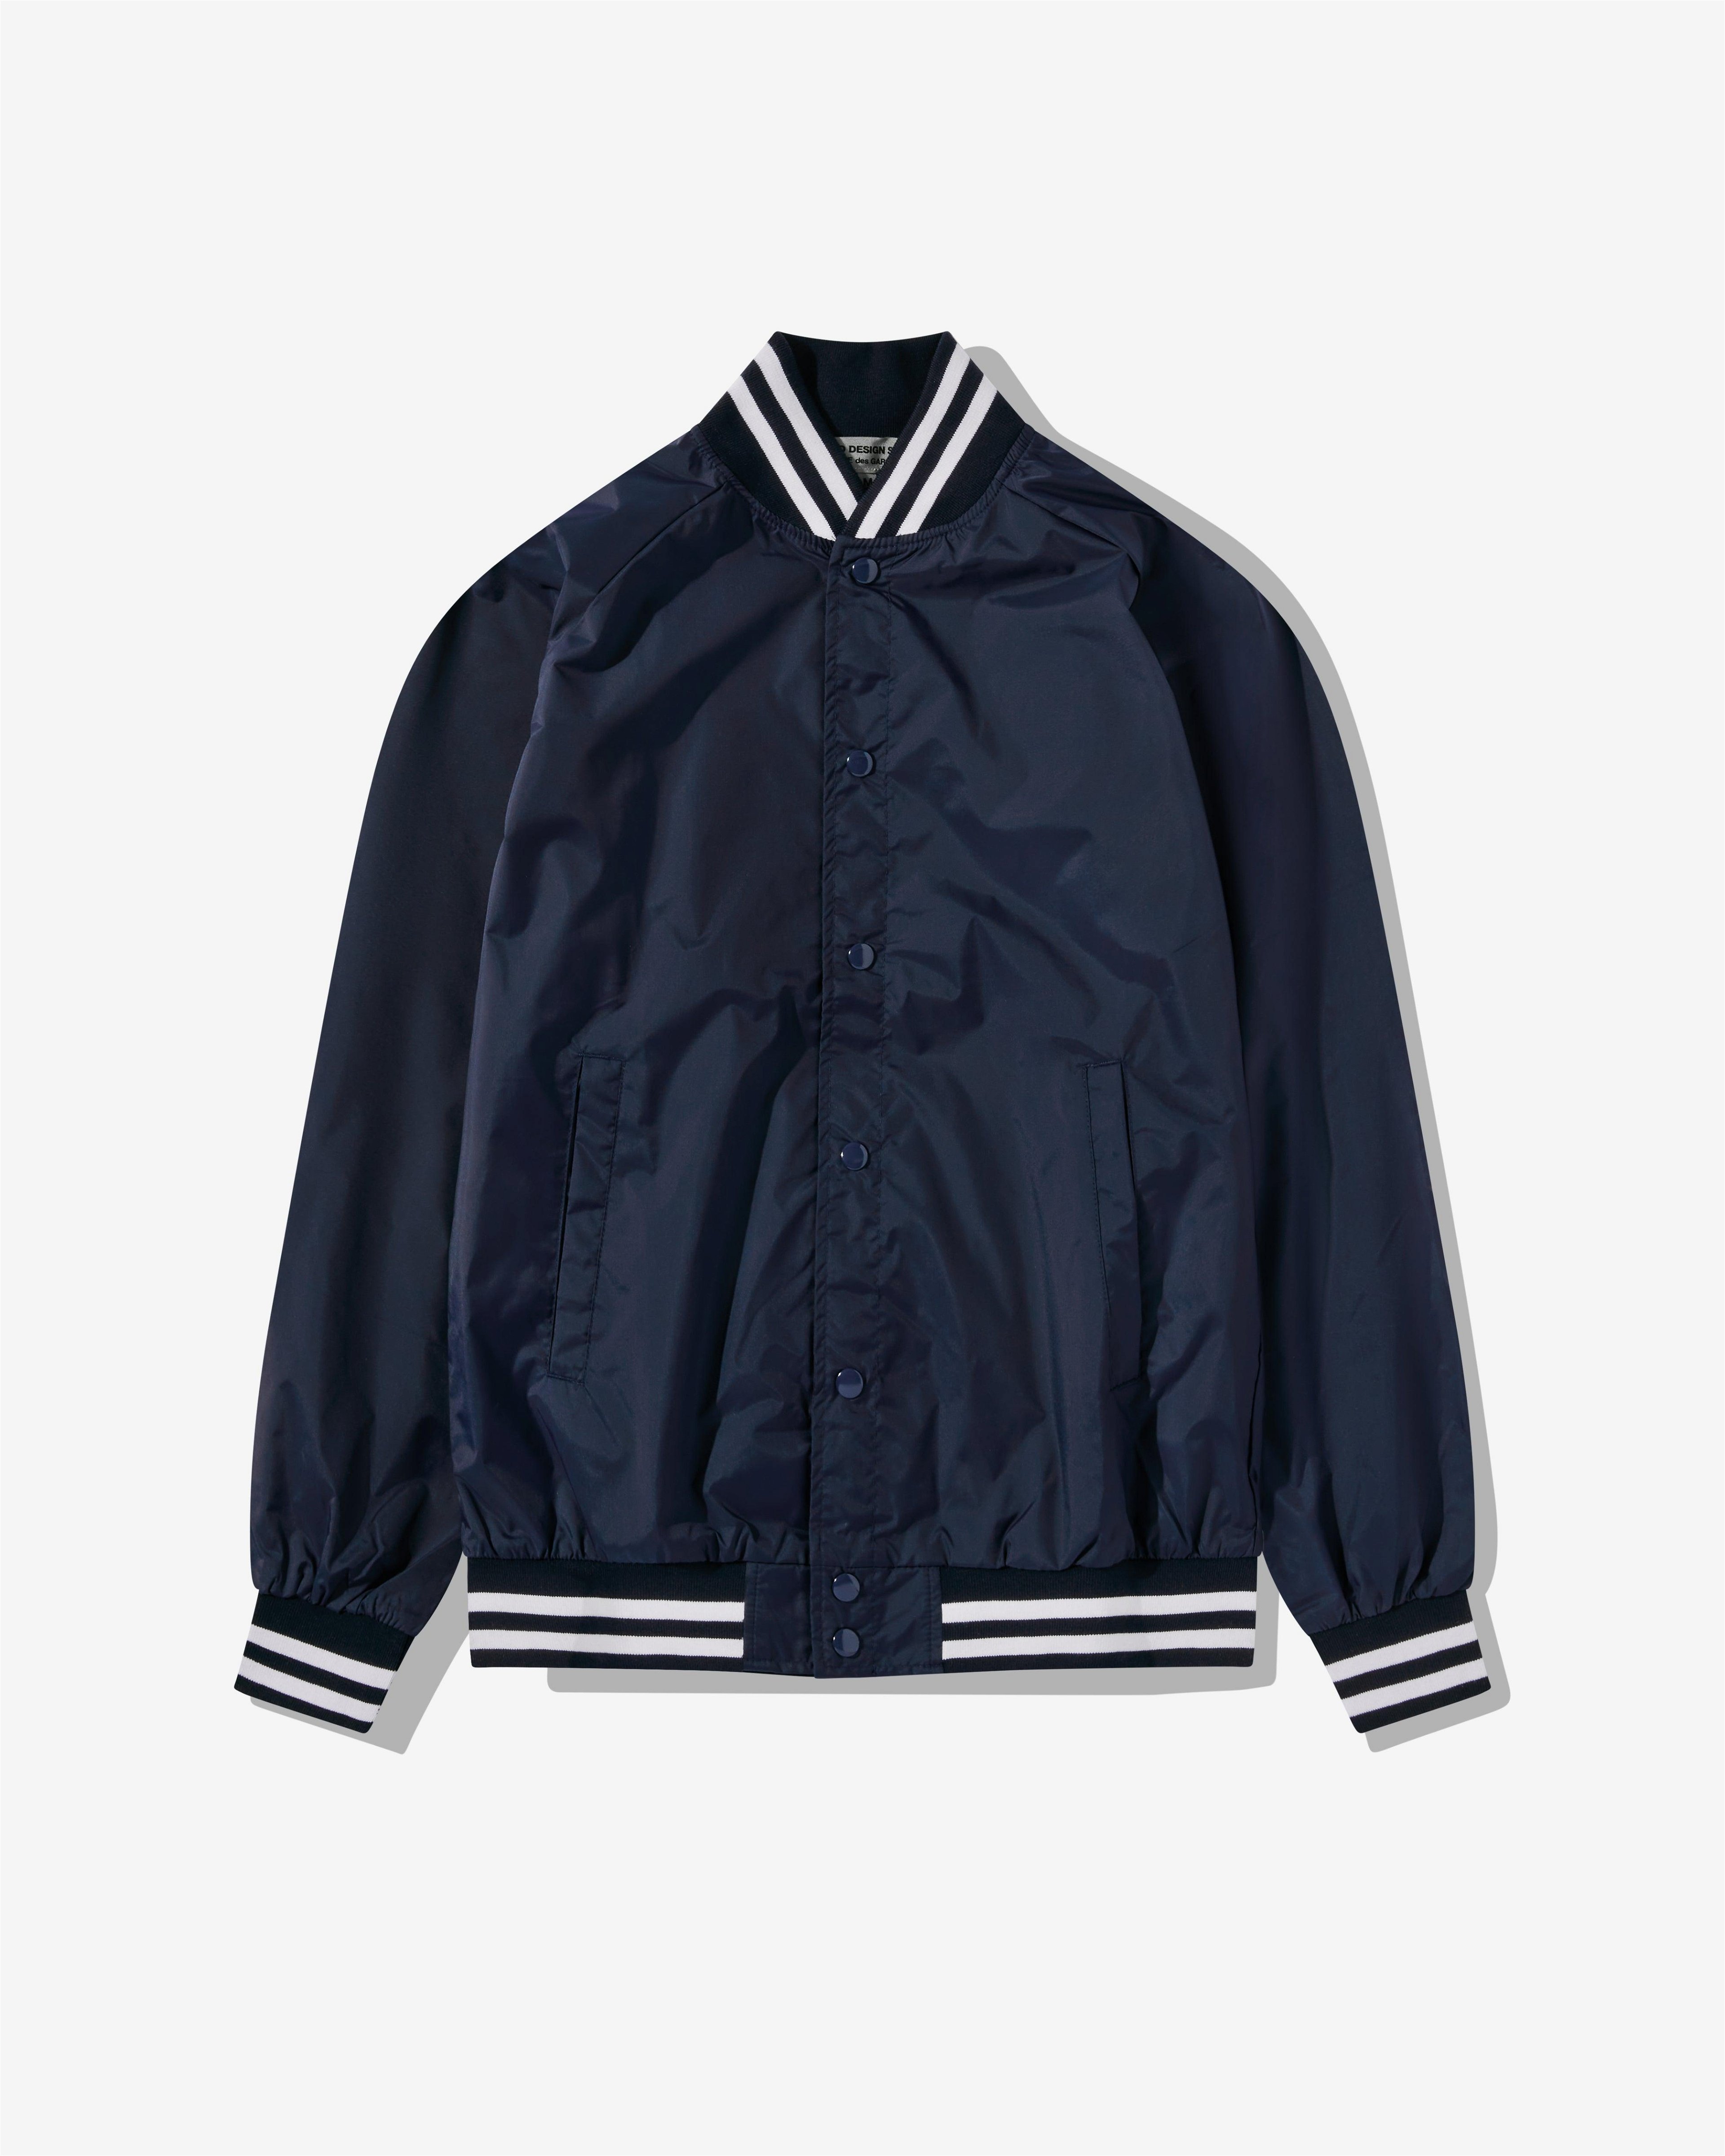 CDG - Stadium Jacket - (Navy) by COMME DES GARCONS